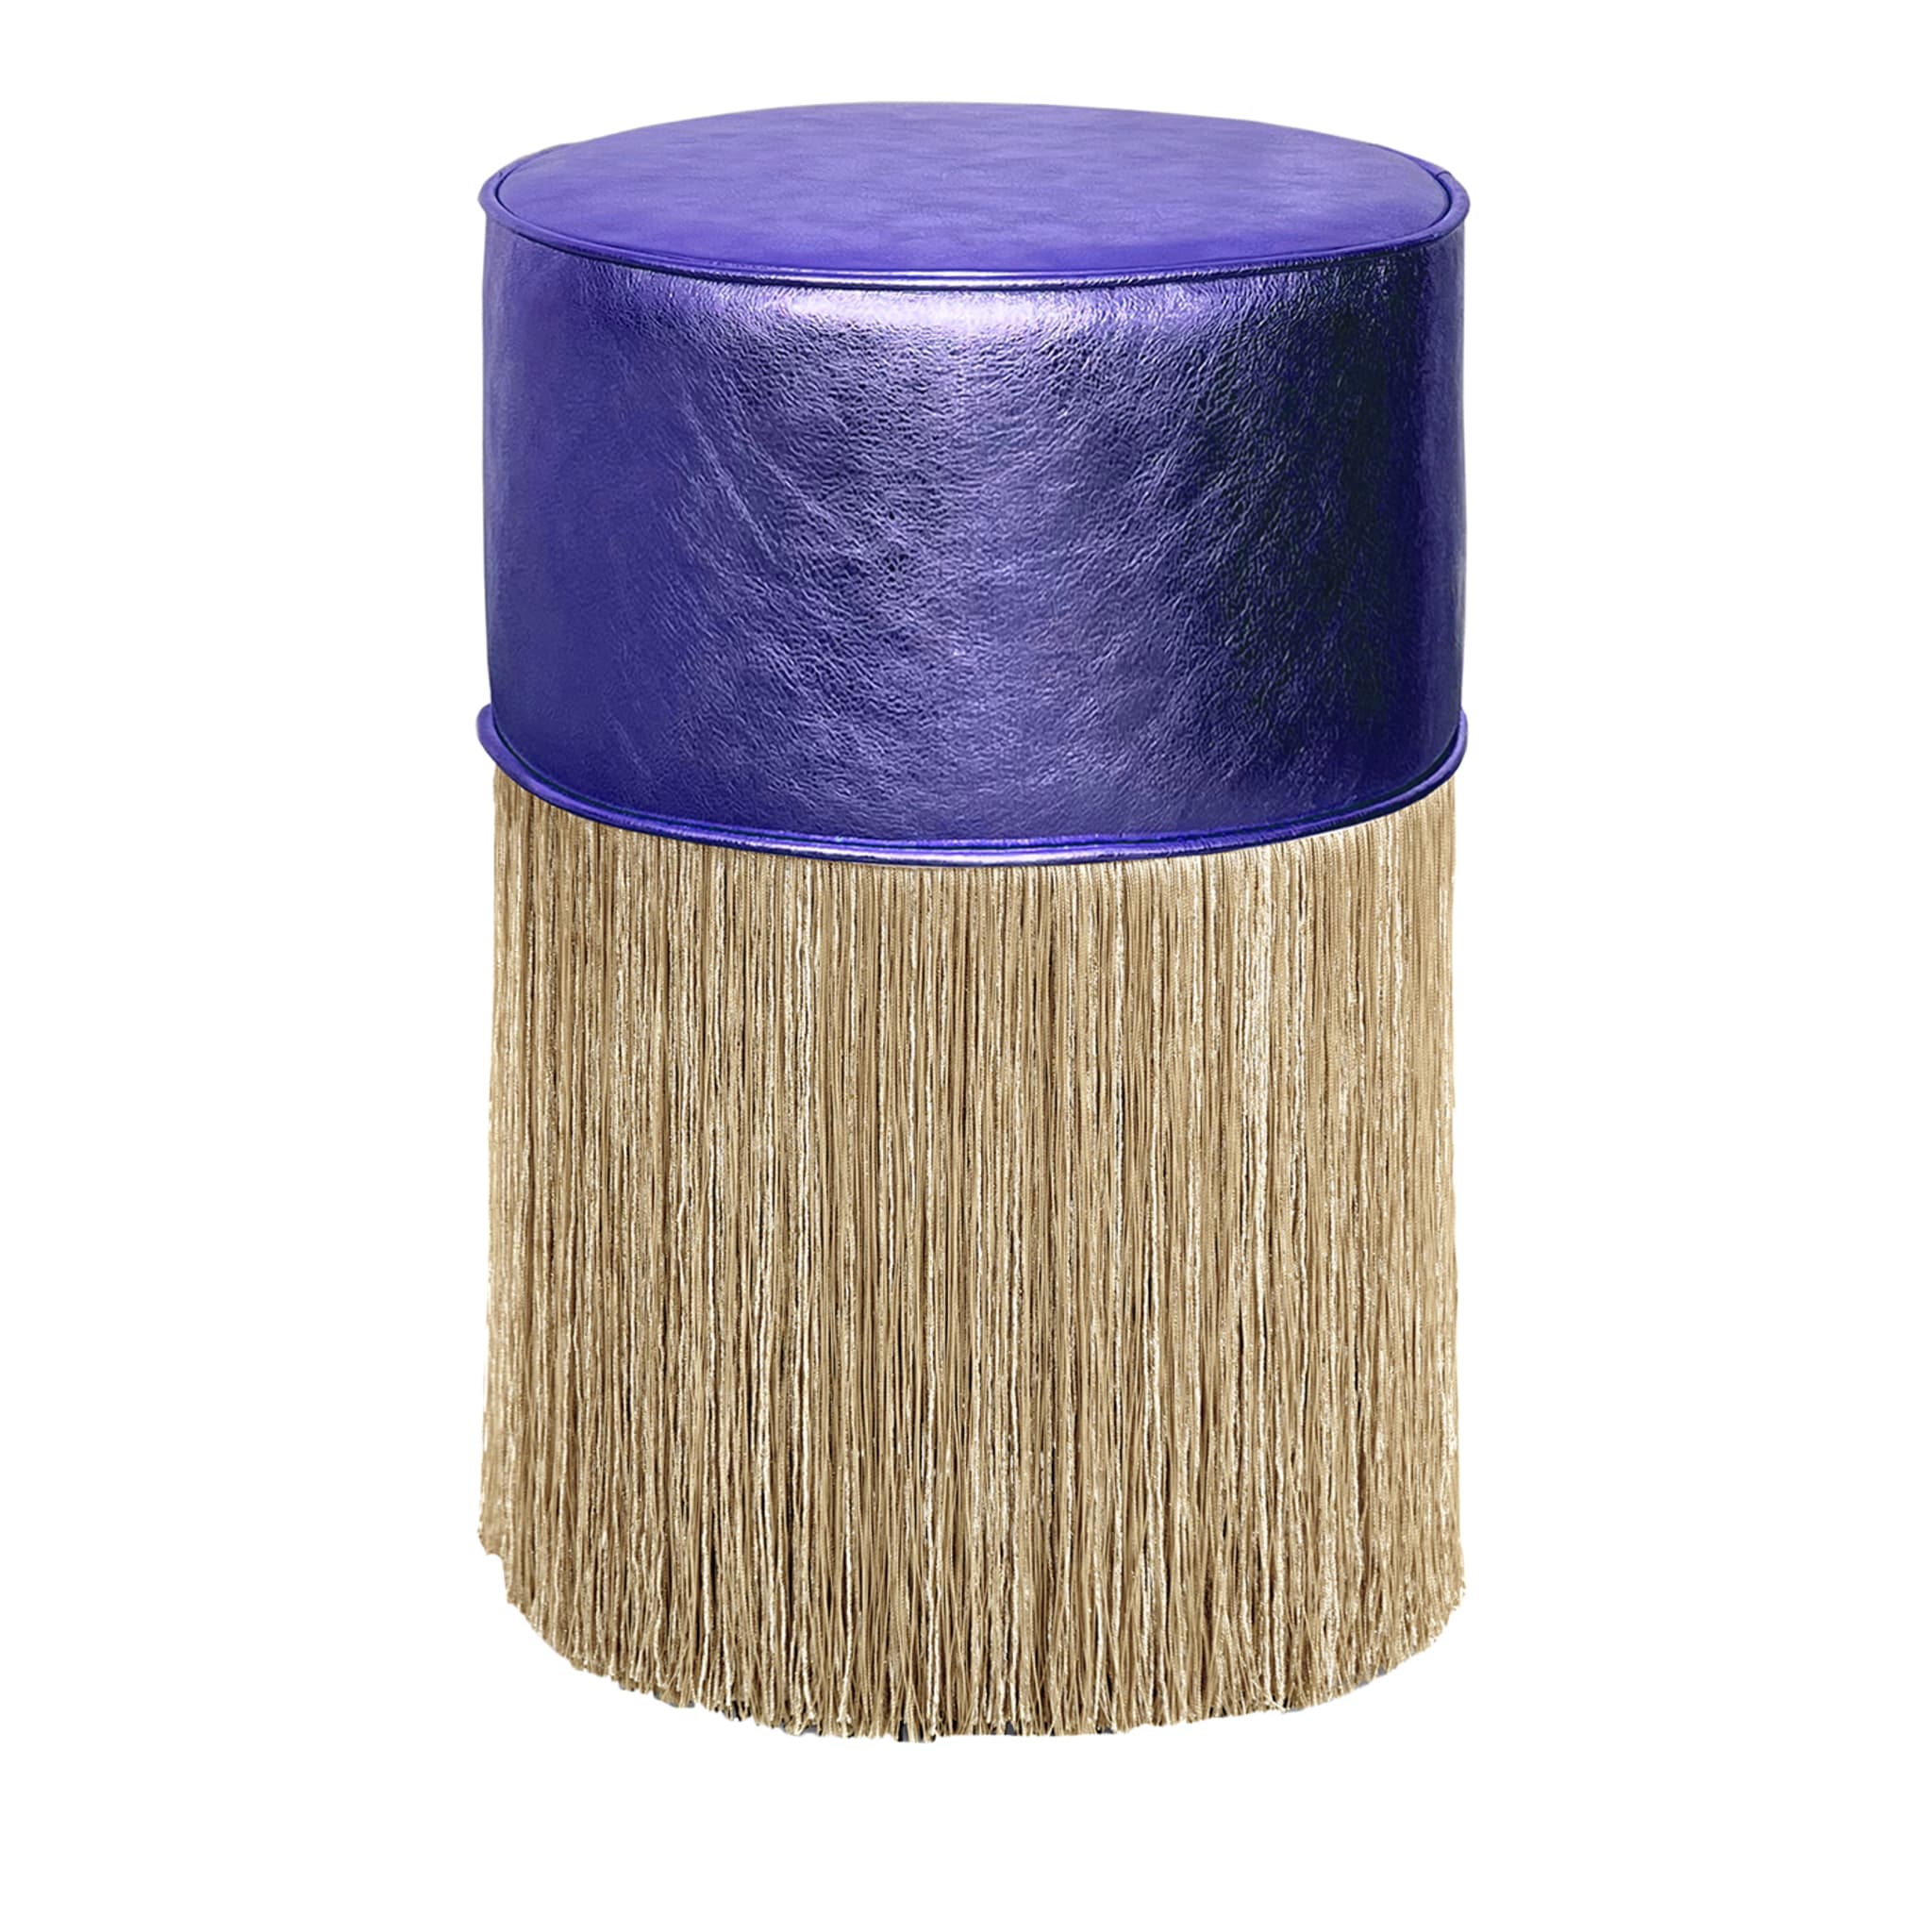 Gleaming Purple Leather Gold Fringes Pouf by Lorenza Bozzoli - Main view